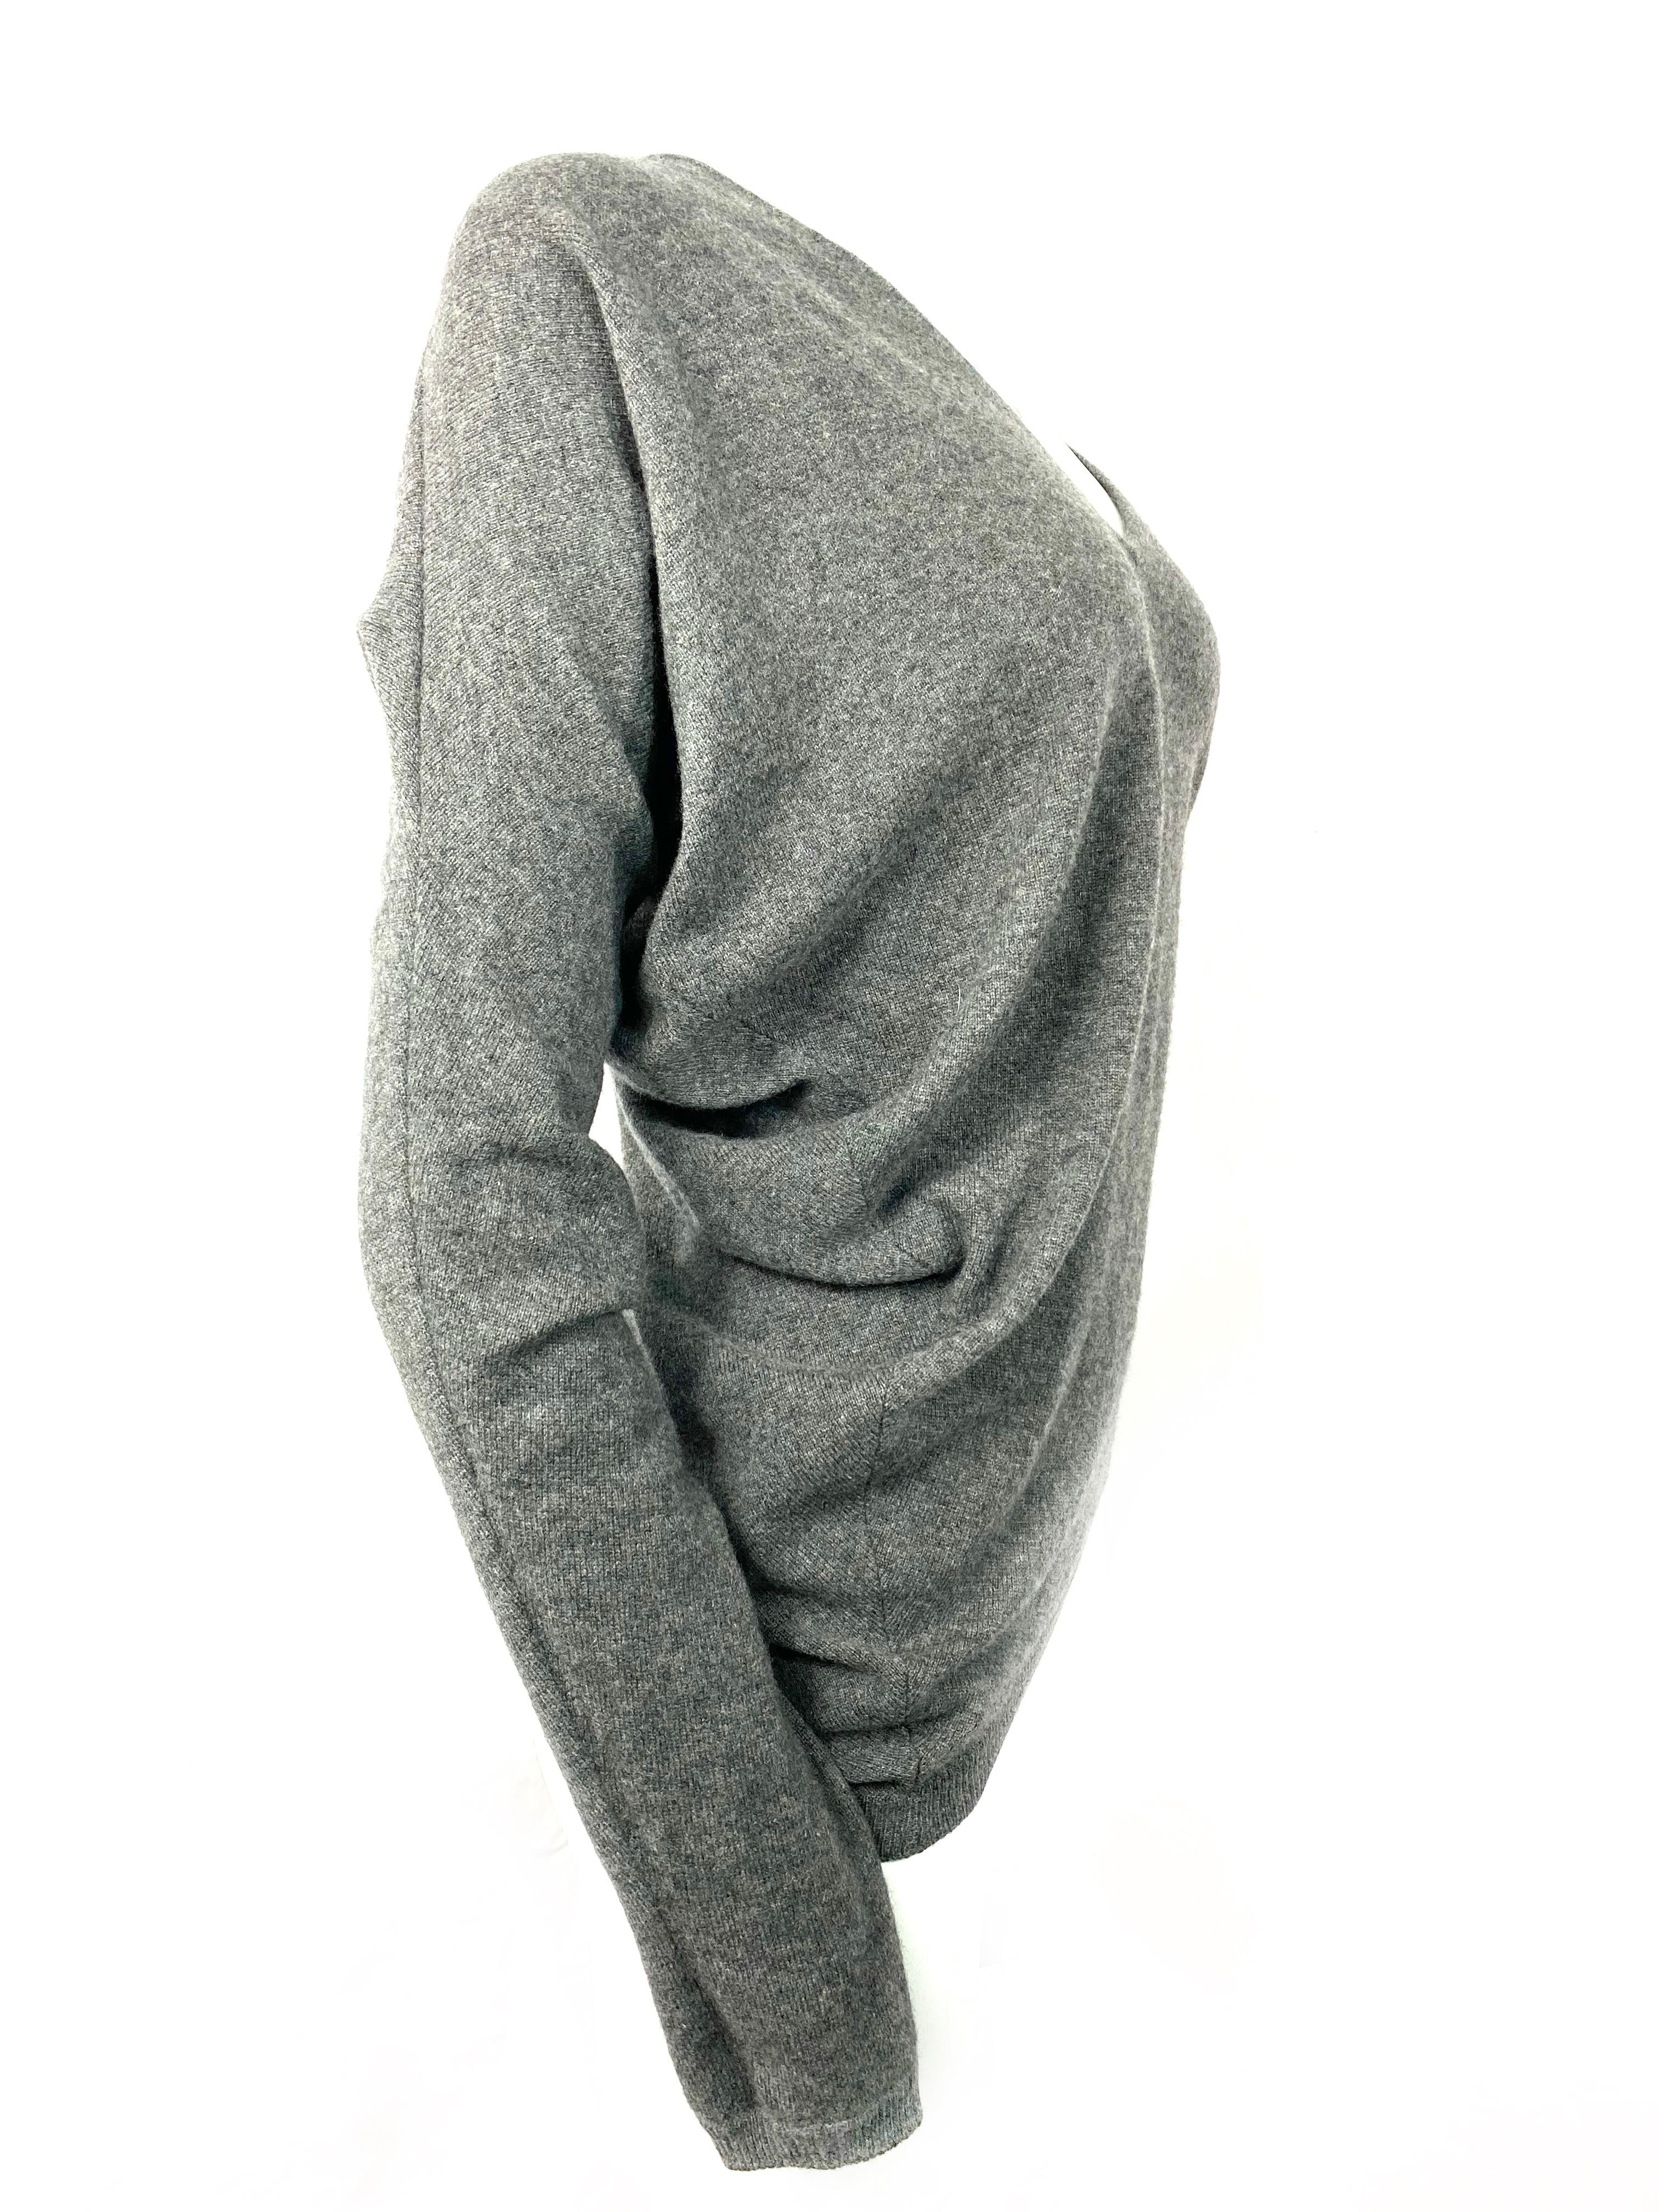 Product details:

Size Small.
Featuring grey cashmere, long sleeves, v neck, asymmetrical design. 